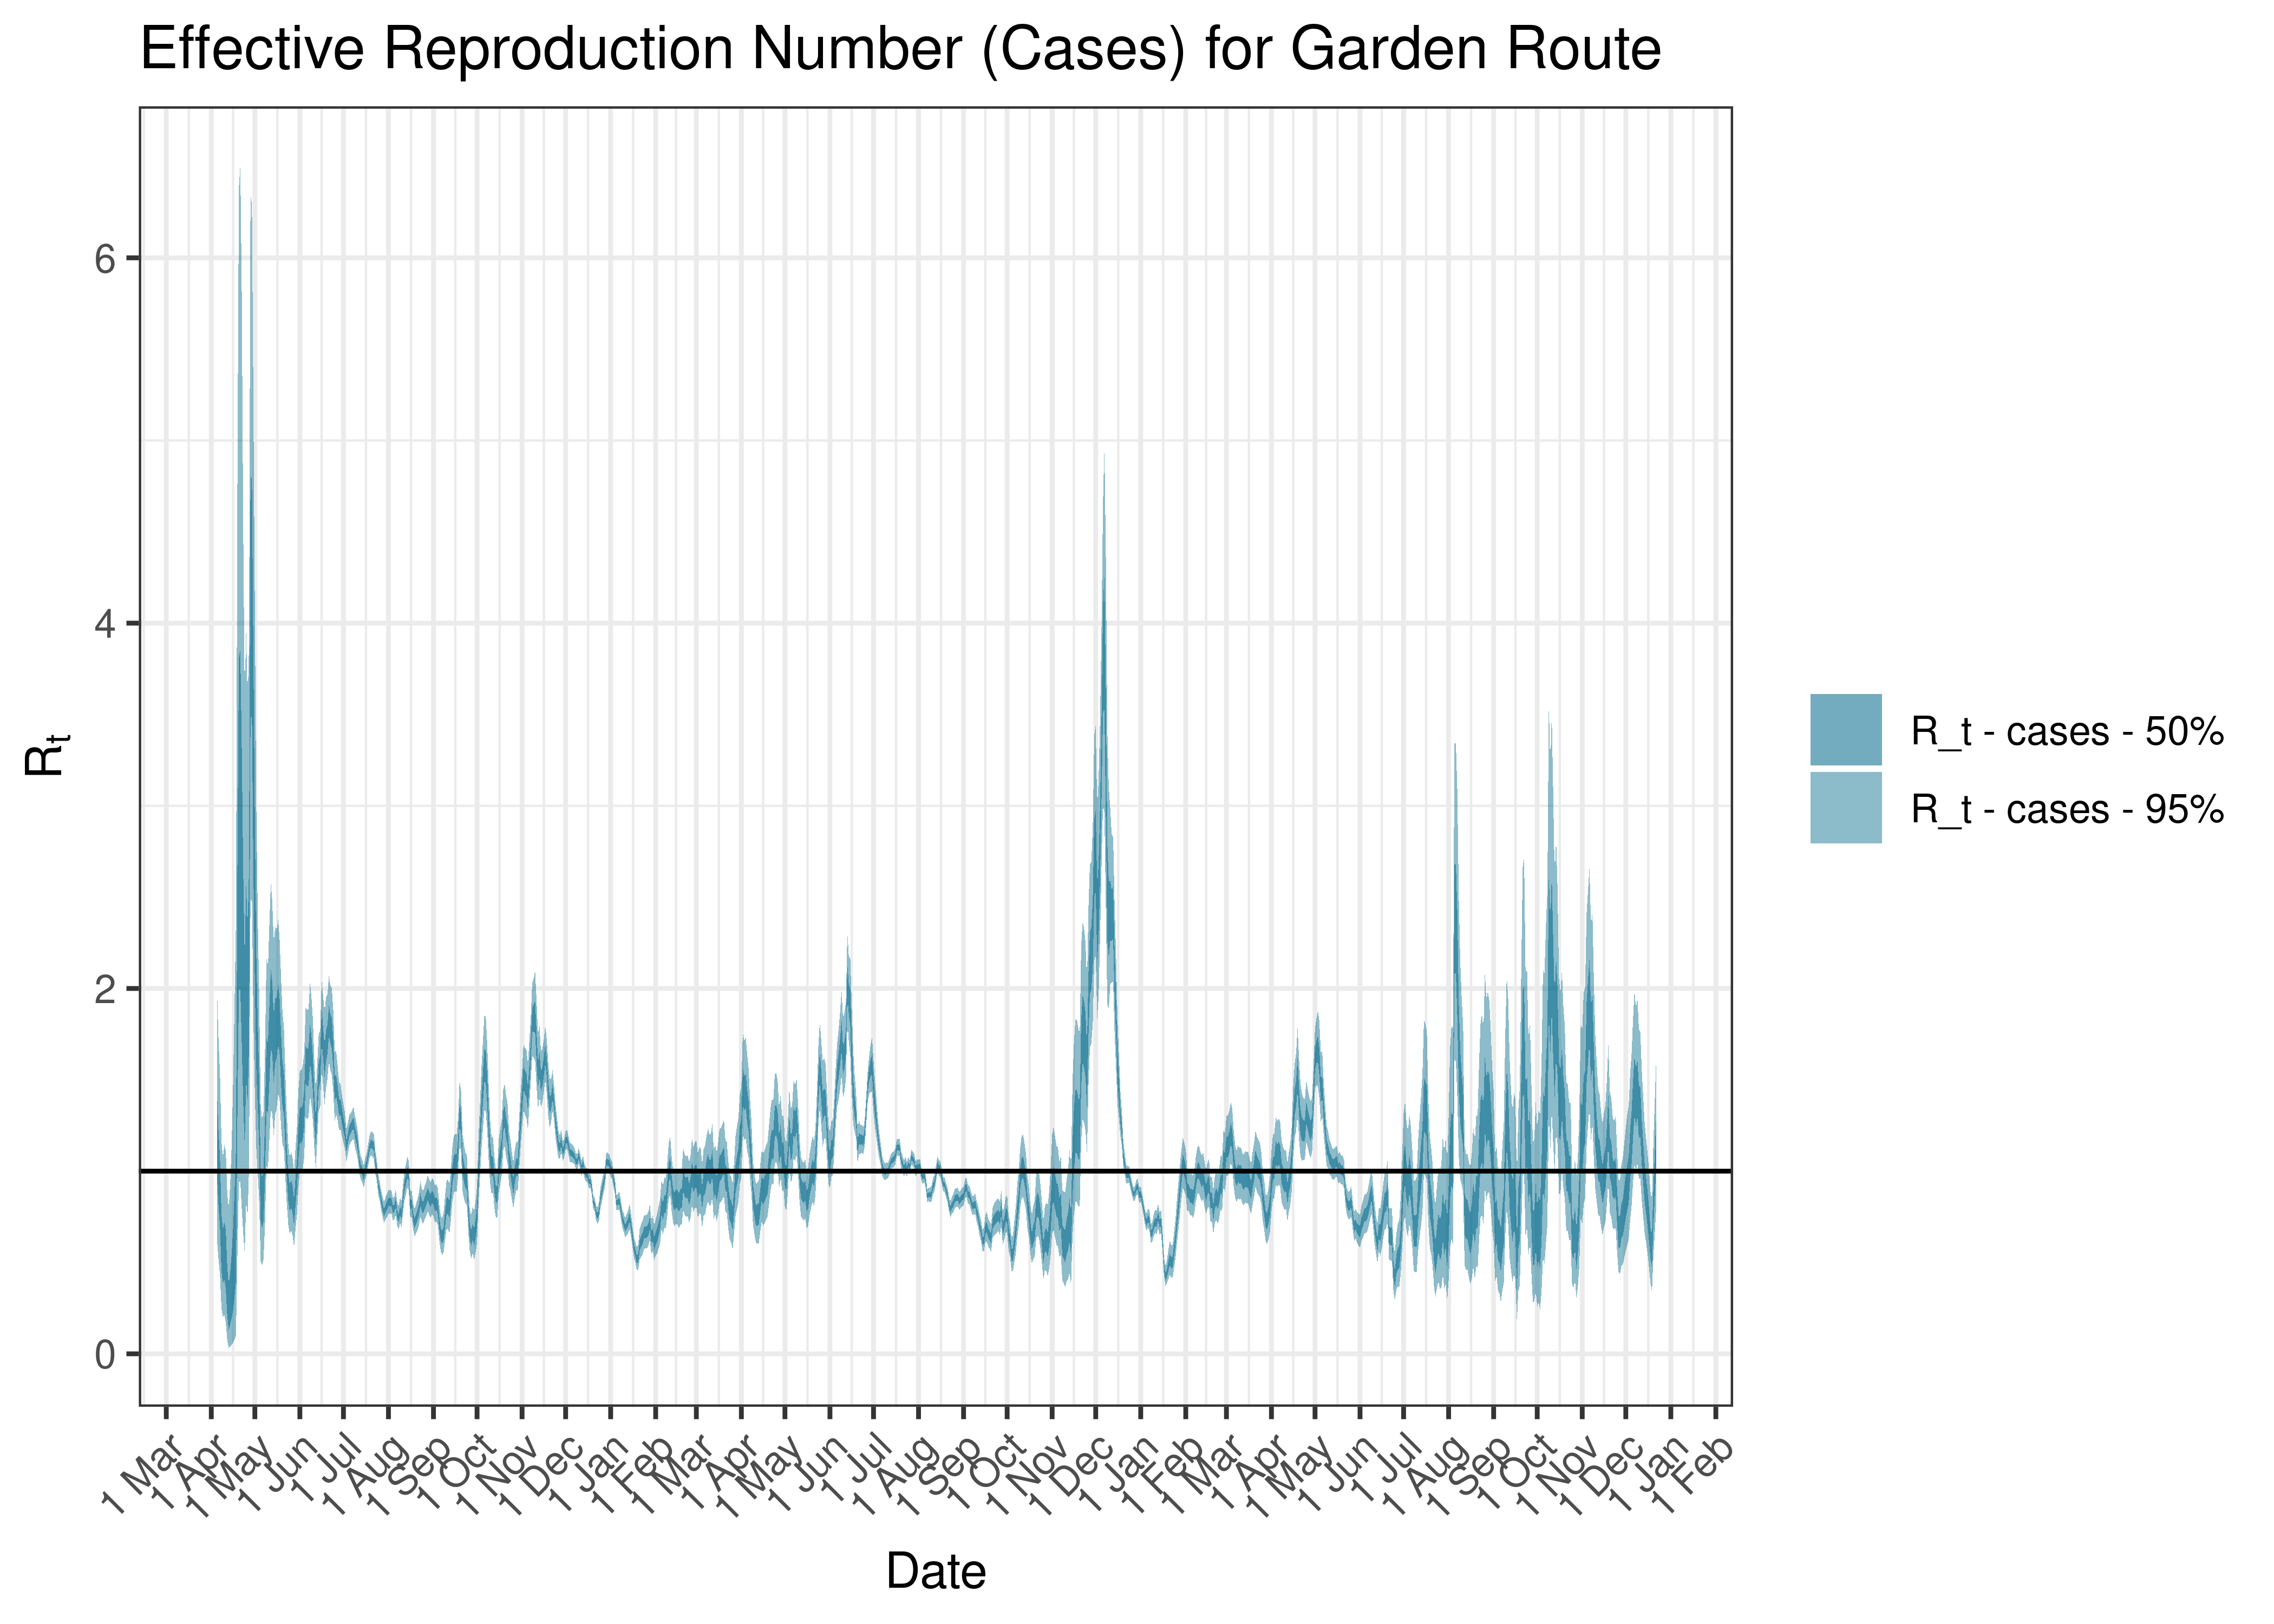 Estimated Effective Reproduction Number Based on Cases for Garden Route since 1 April 2020